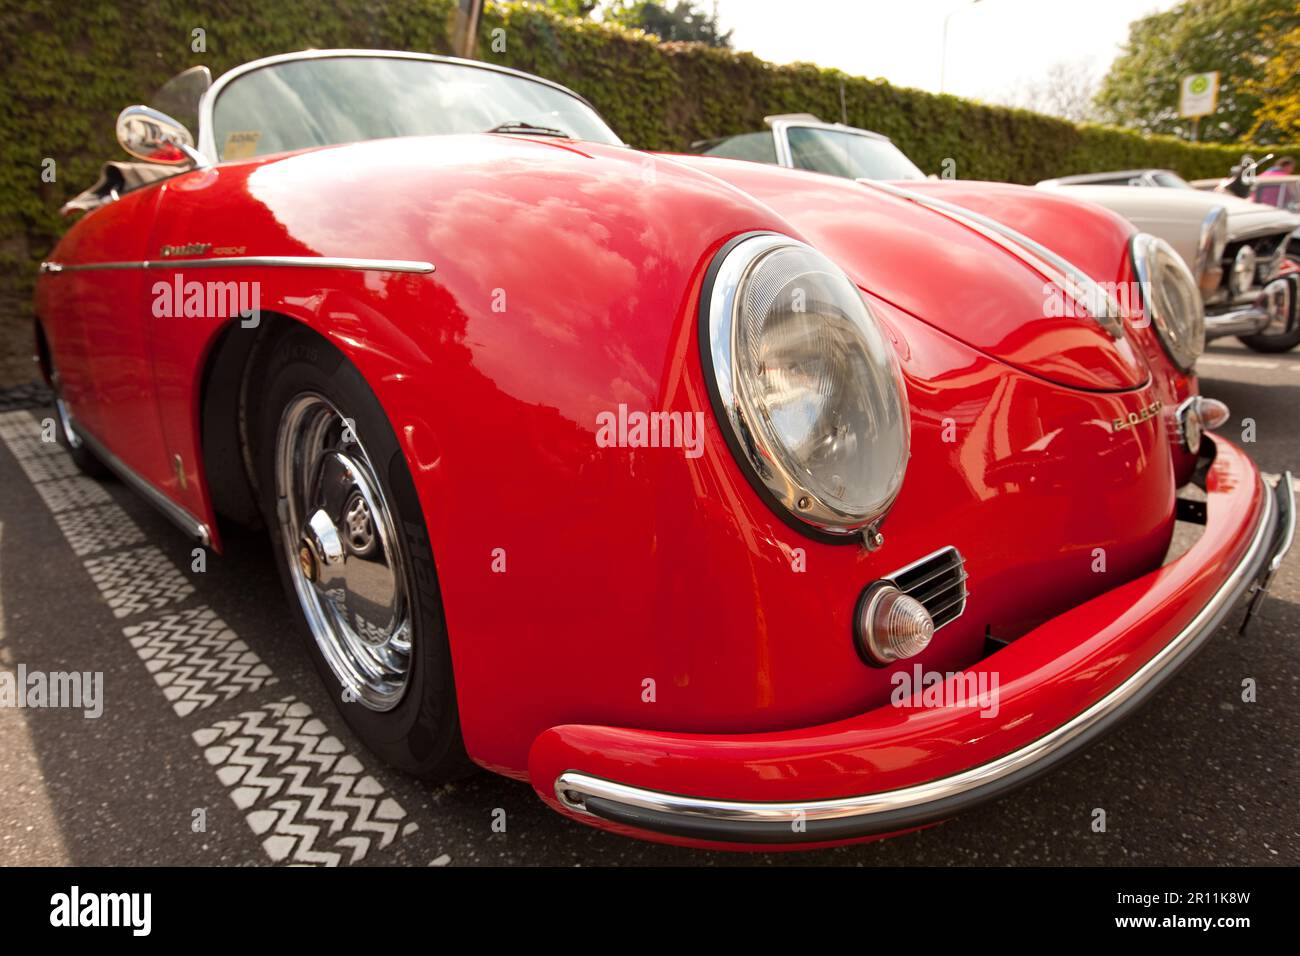 Vintage Porsche 356 Convertible, sports car, round headlights, driving open, red paint, shine, car care Stock Photo